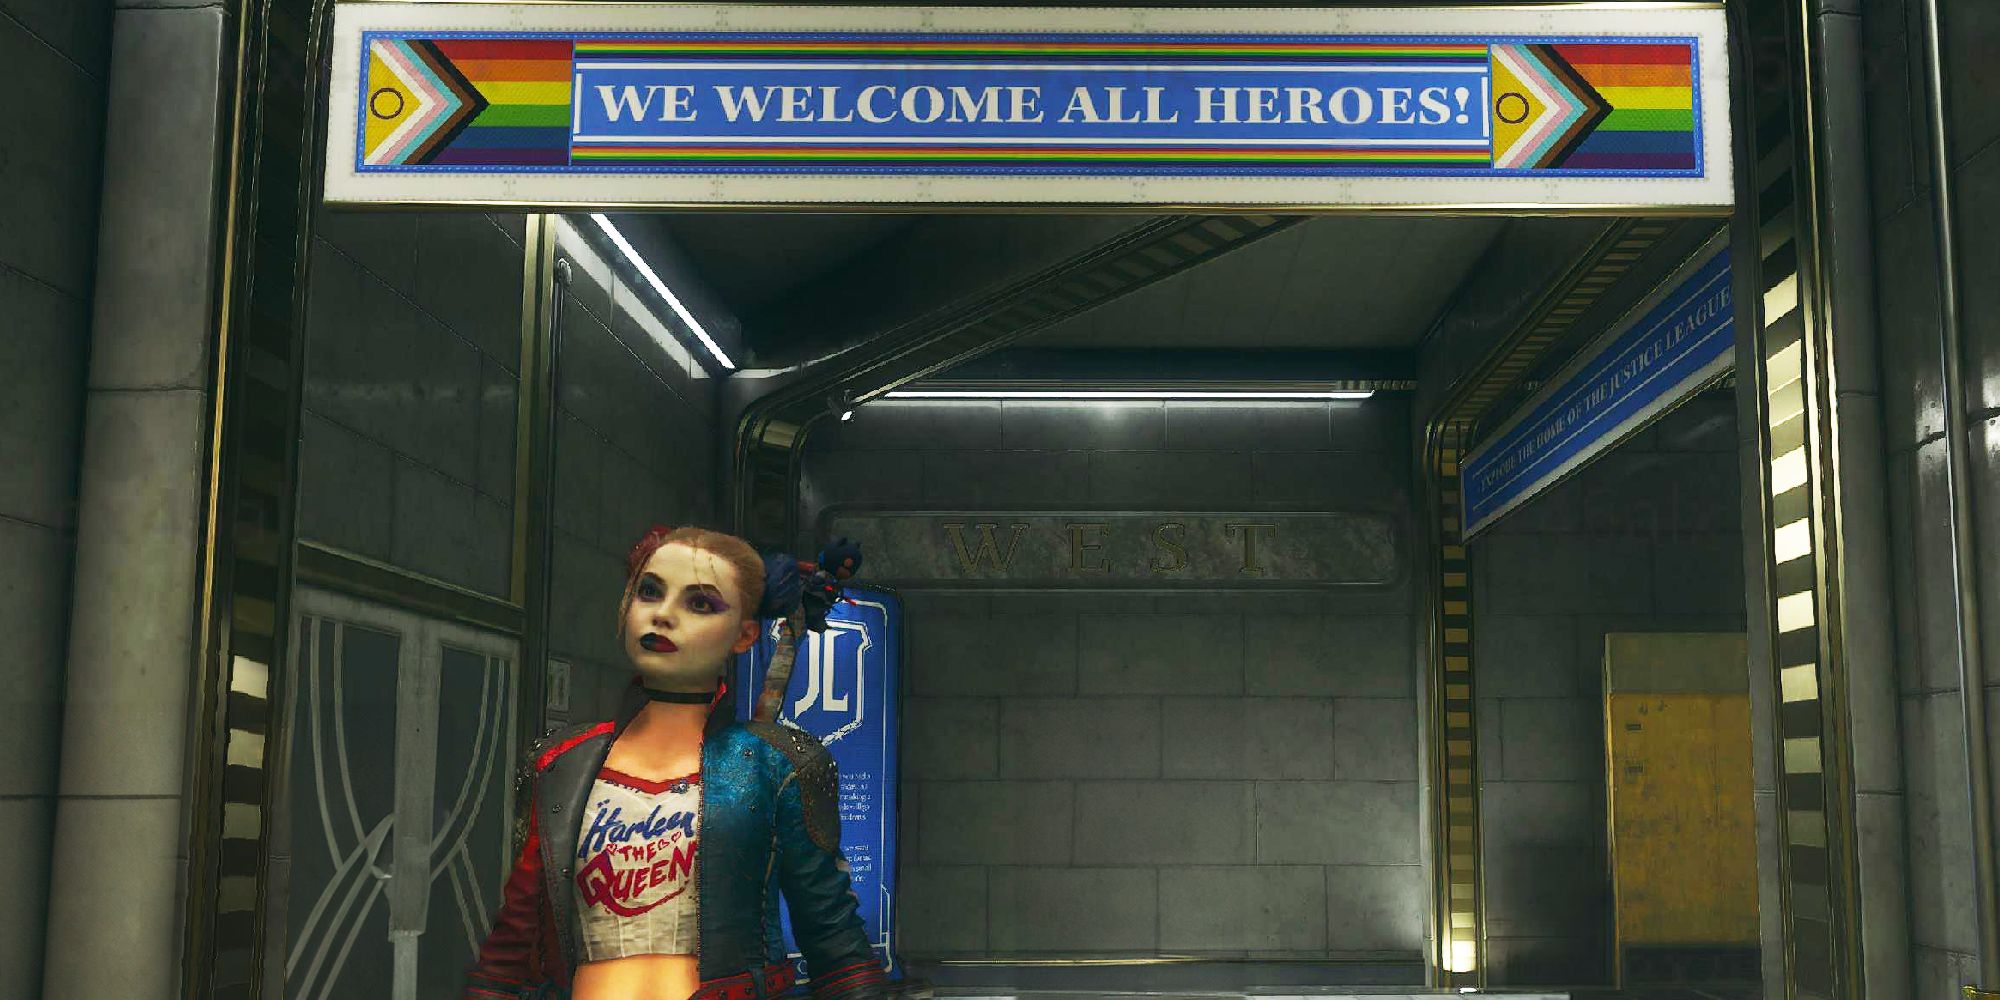 suicide-squad-kill-the-justice-league-harley-walking-through-the-justice-hall-with-a-sign-adorned-by-lgbt-flags-above-saying-we-welcome-all-heroes.jpg